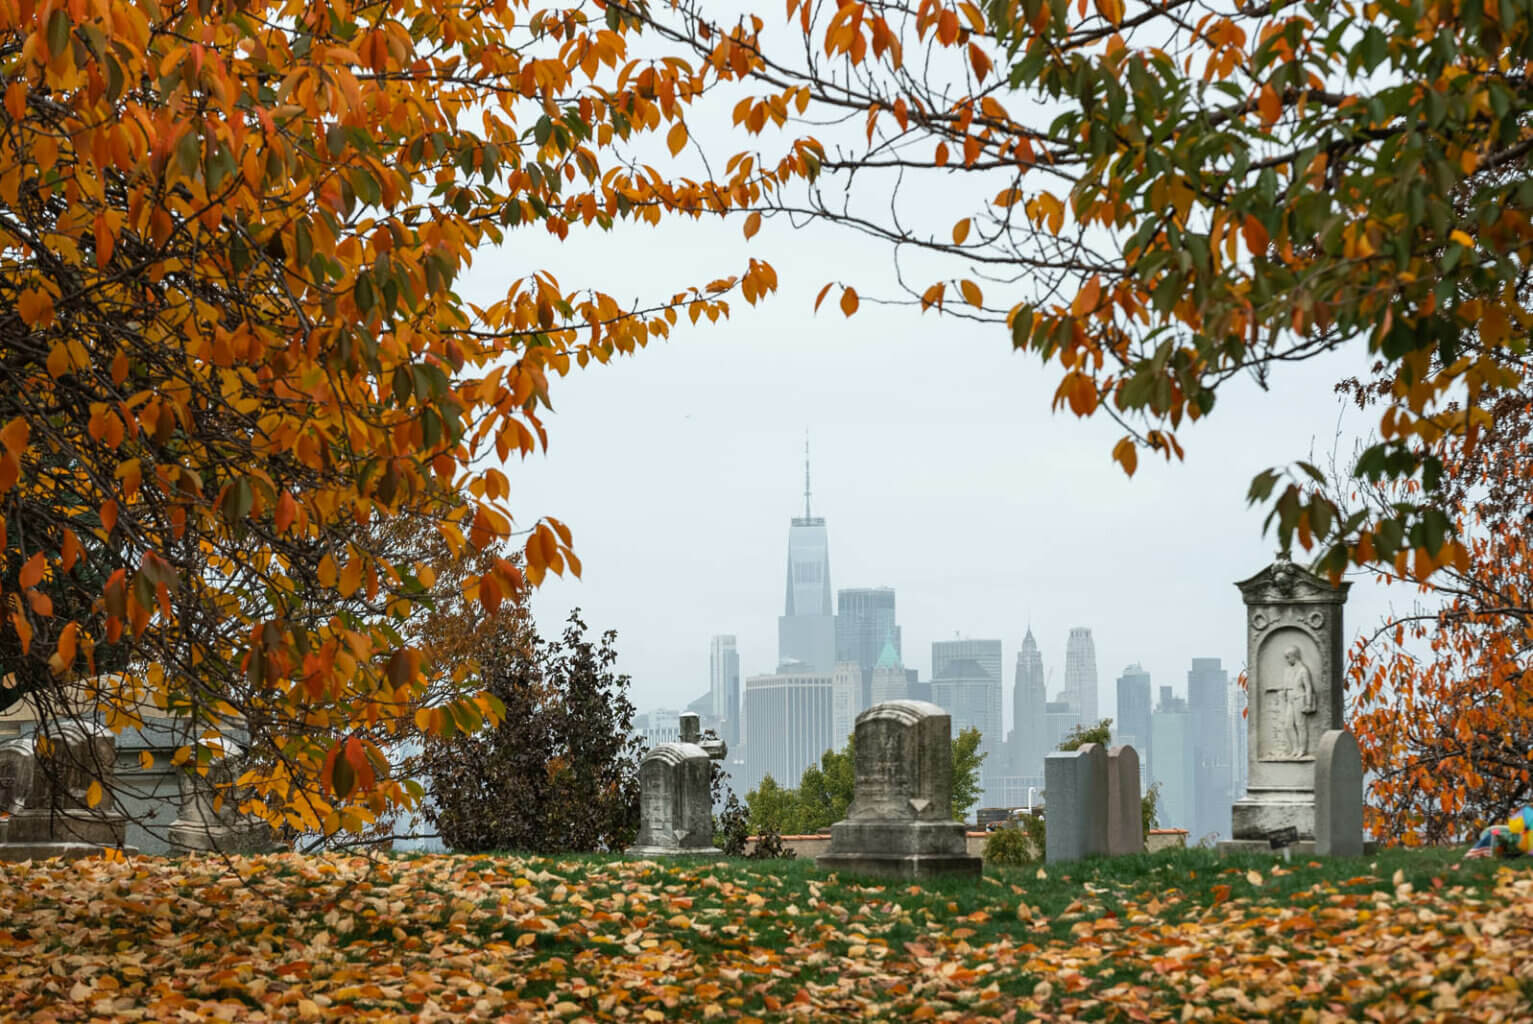 view of the world trade center in NYC from Green Wood Cemetery in Brooklyn in the fall